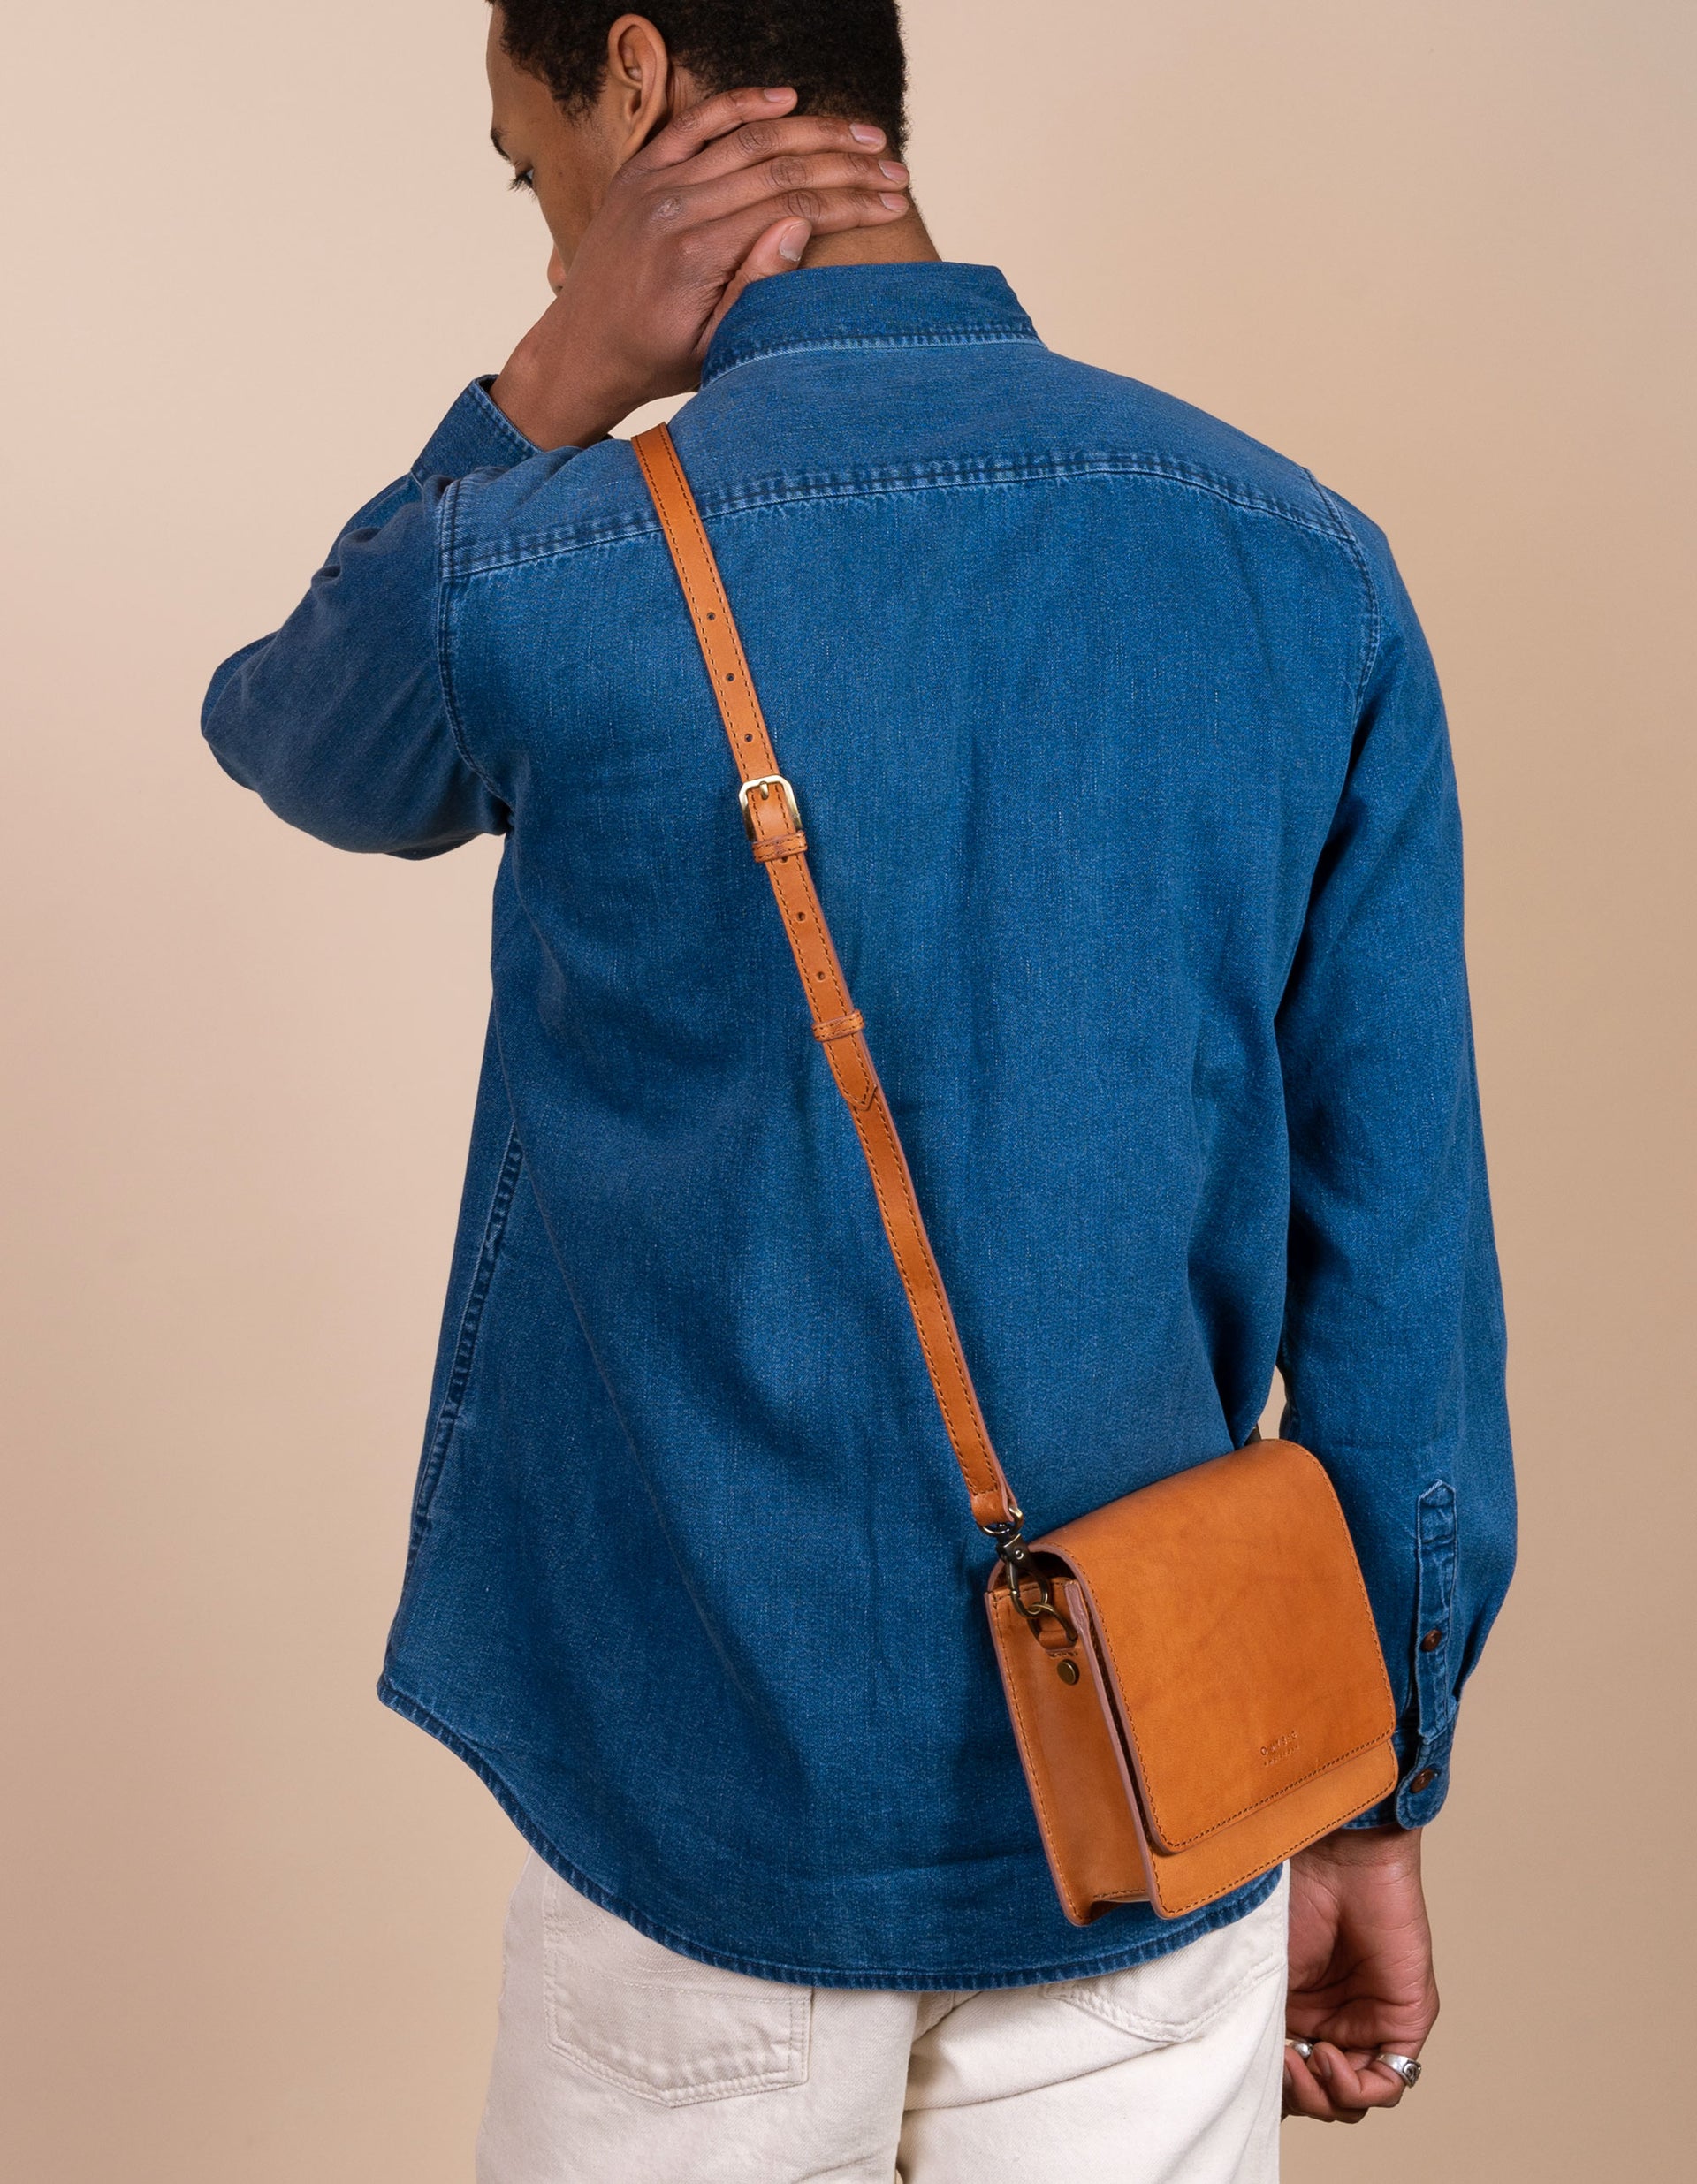 Audrey Mini Cognac leather bag. Square shape with an adjustable leather strap. Male Model image